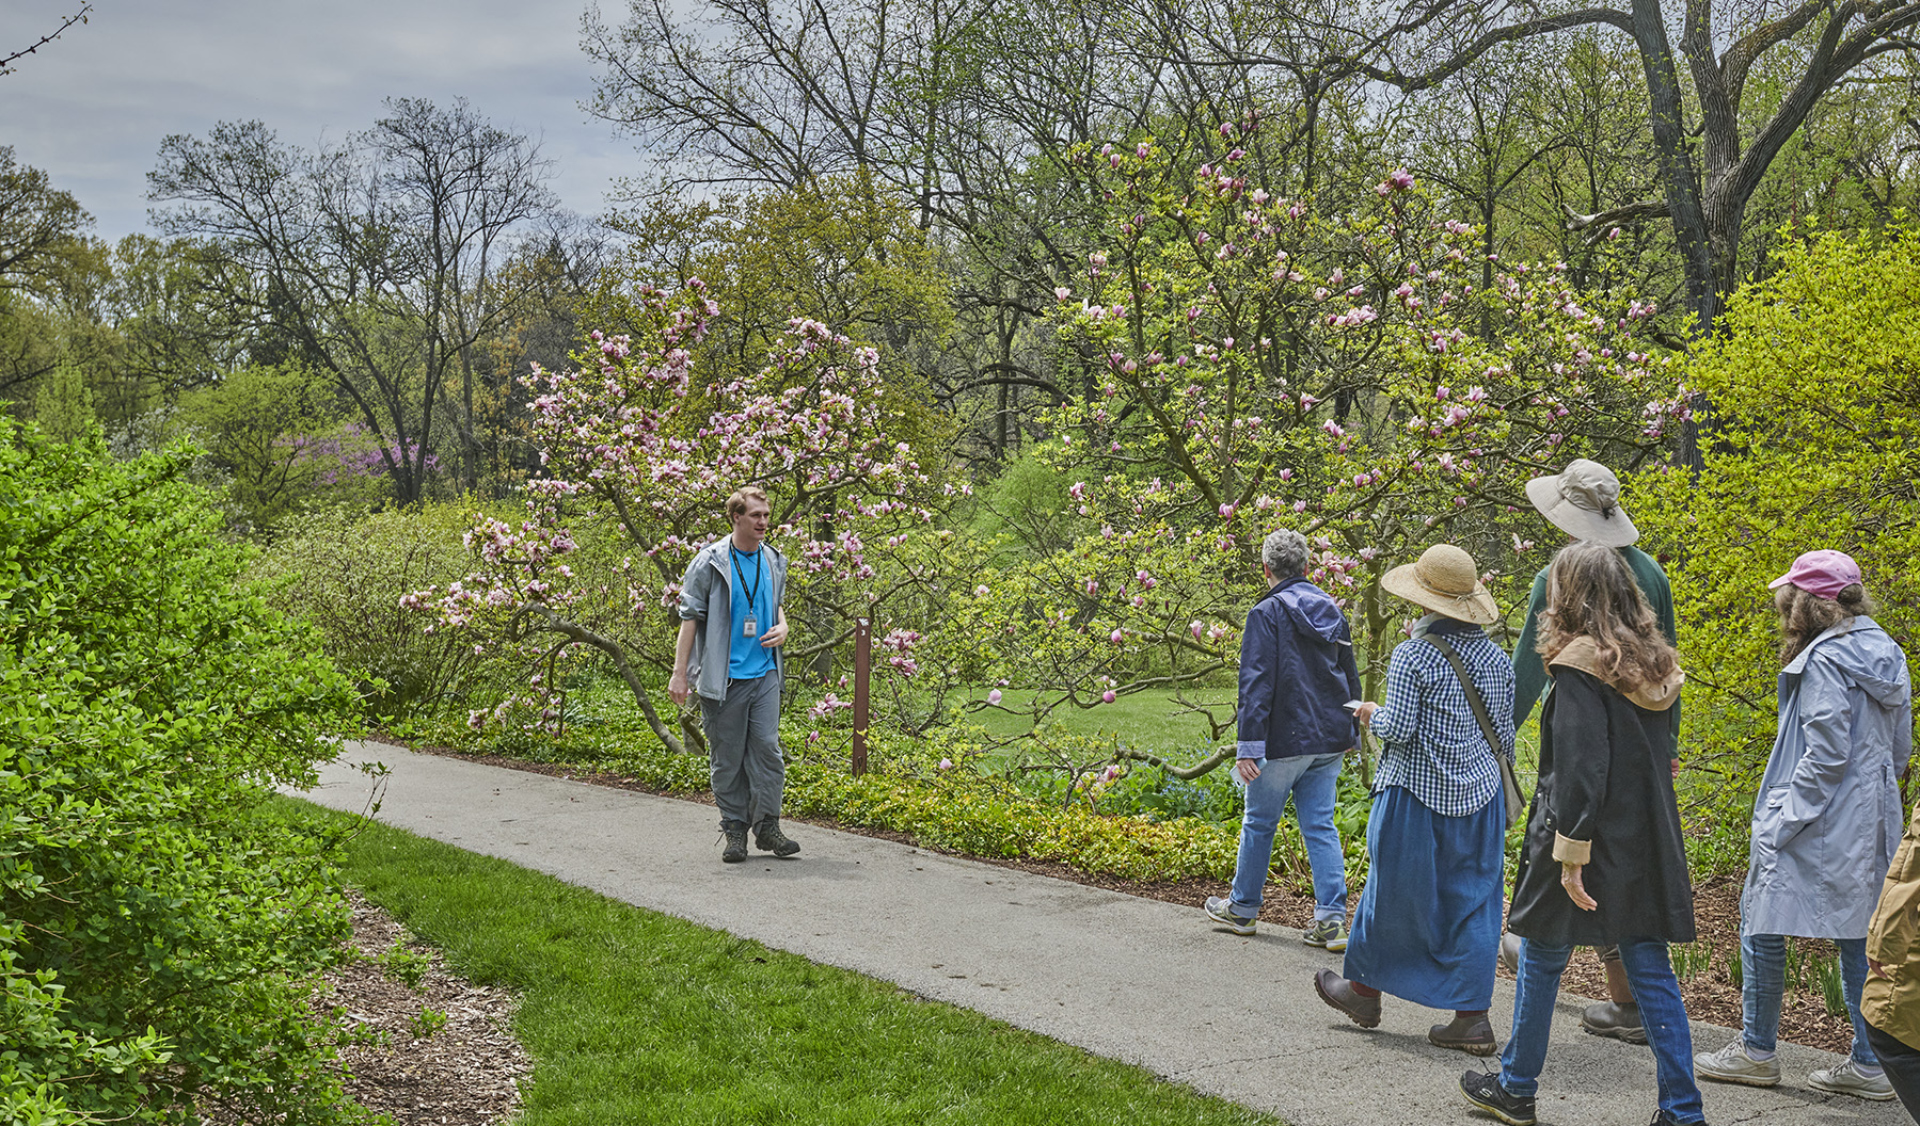 Arboretum staff guiding a group through the flowering trees of spring.